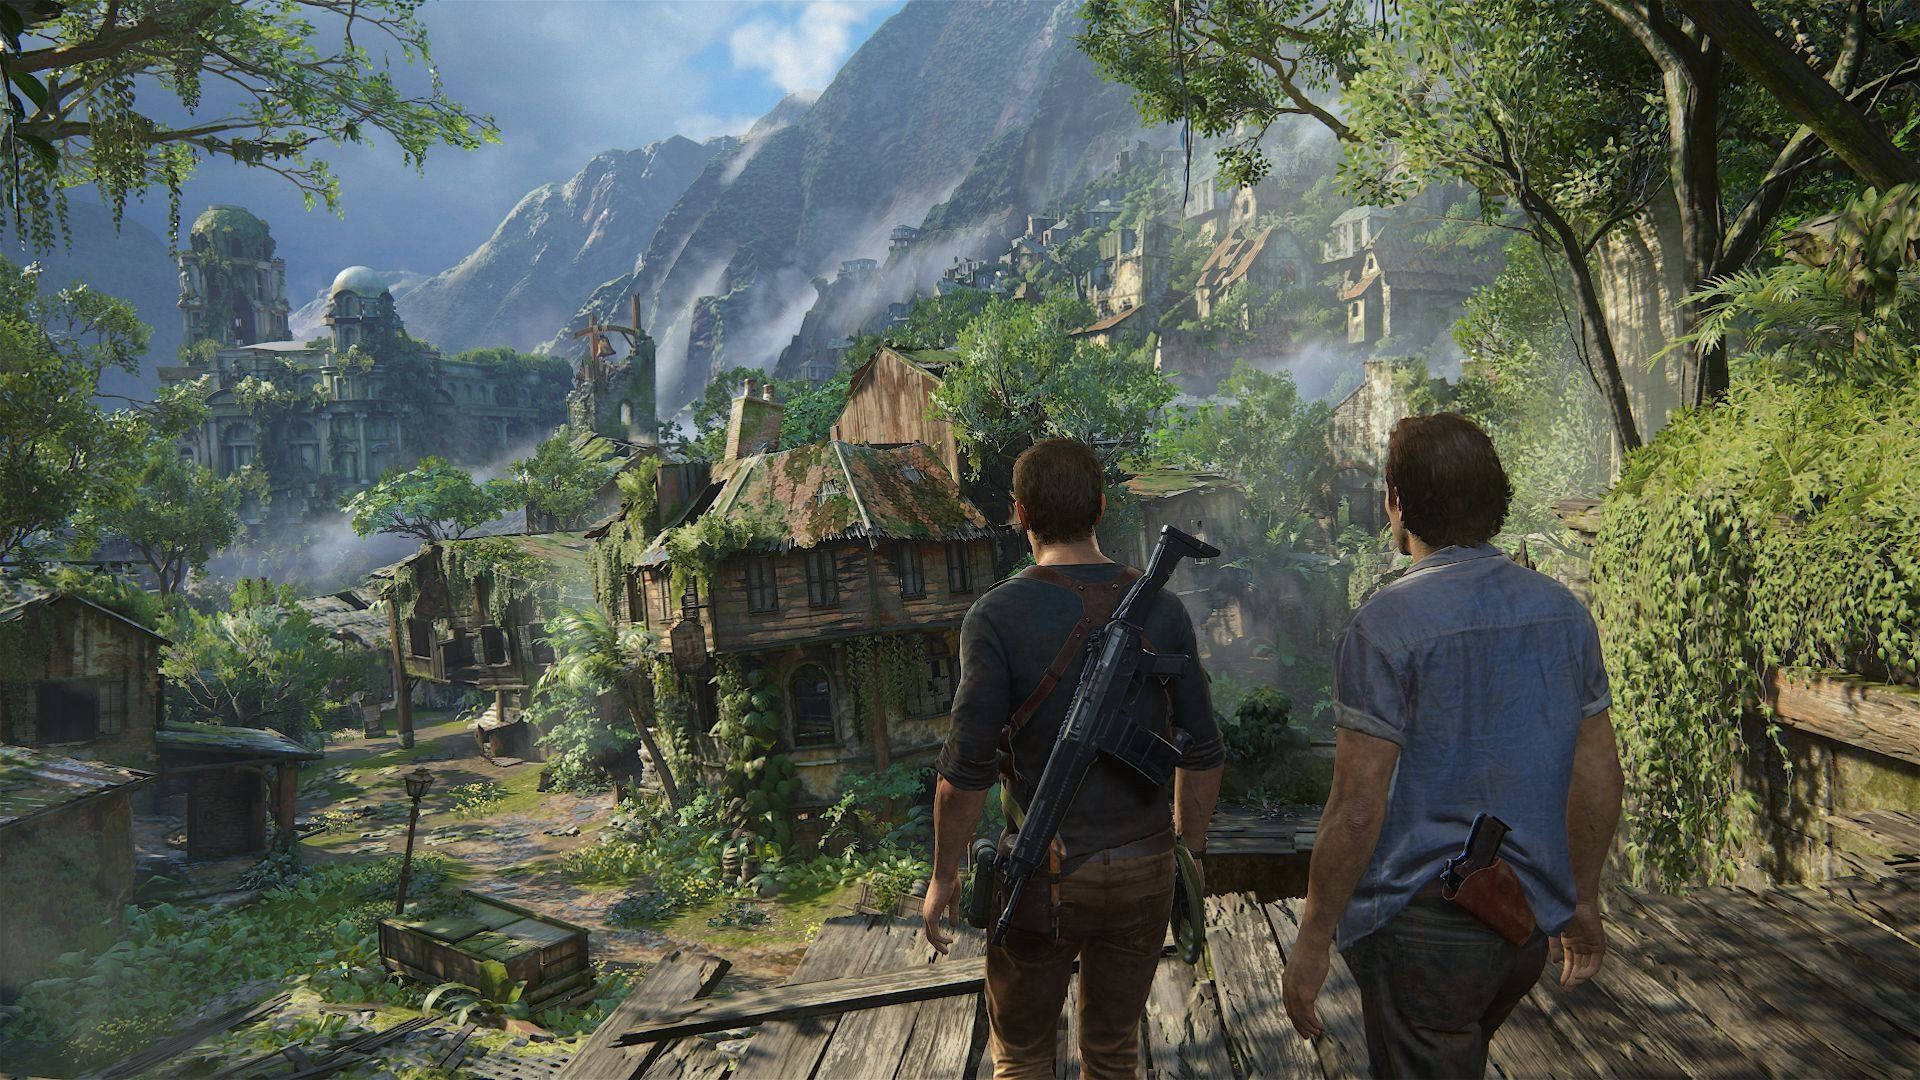 Exhilarating Adventure In Uncharted Game Village